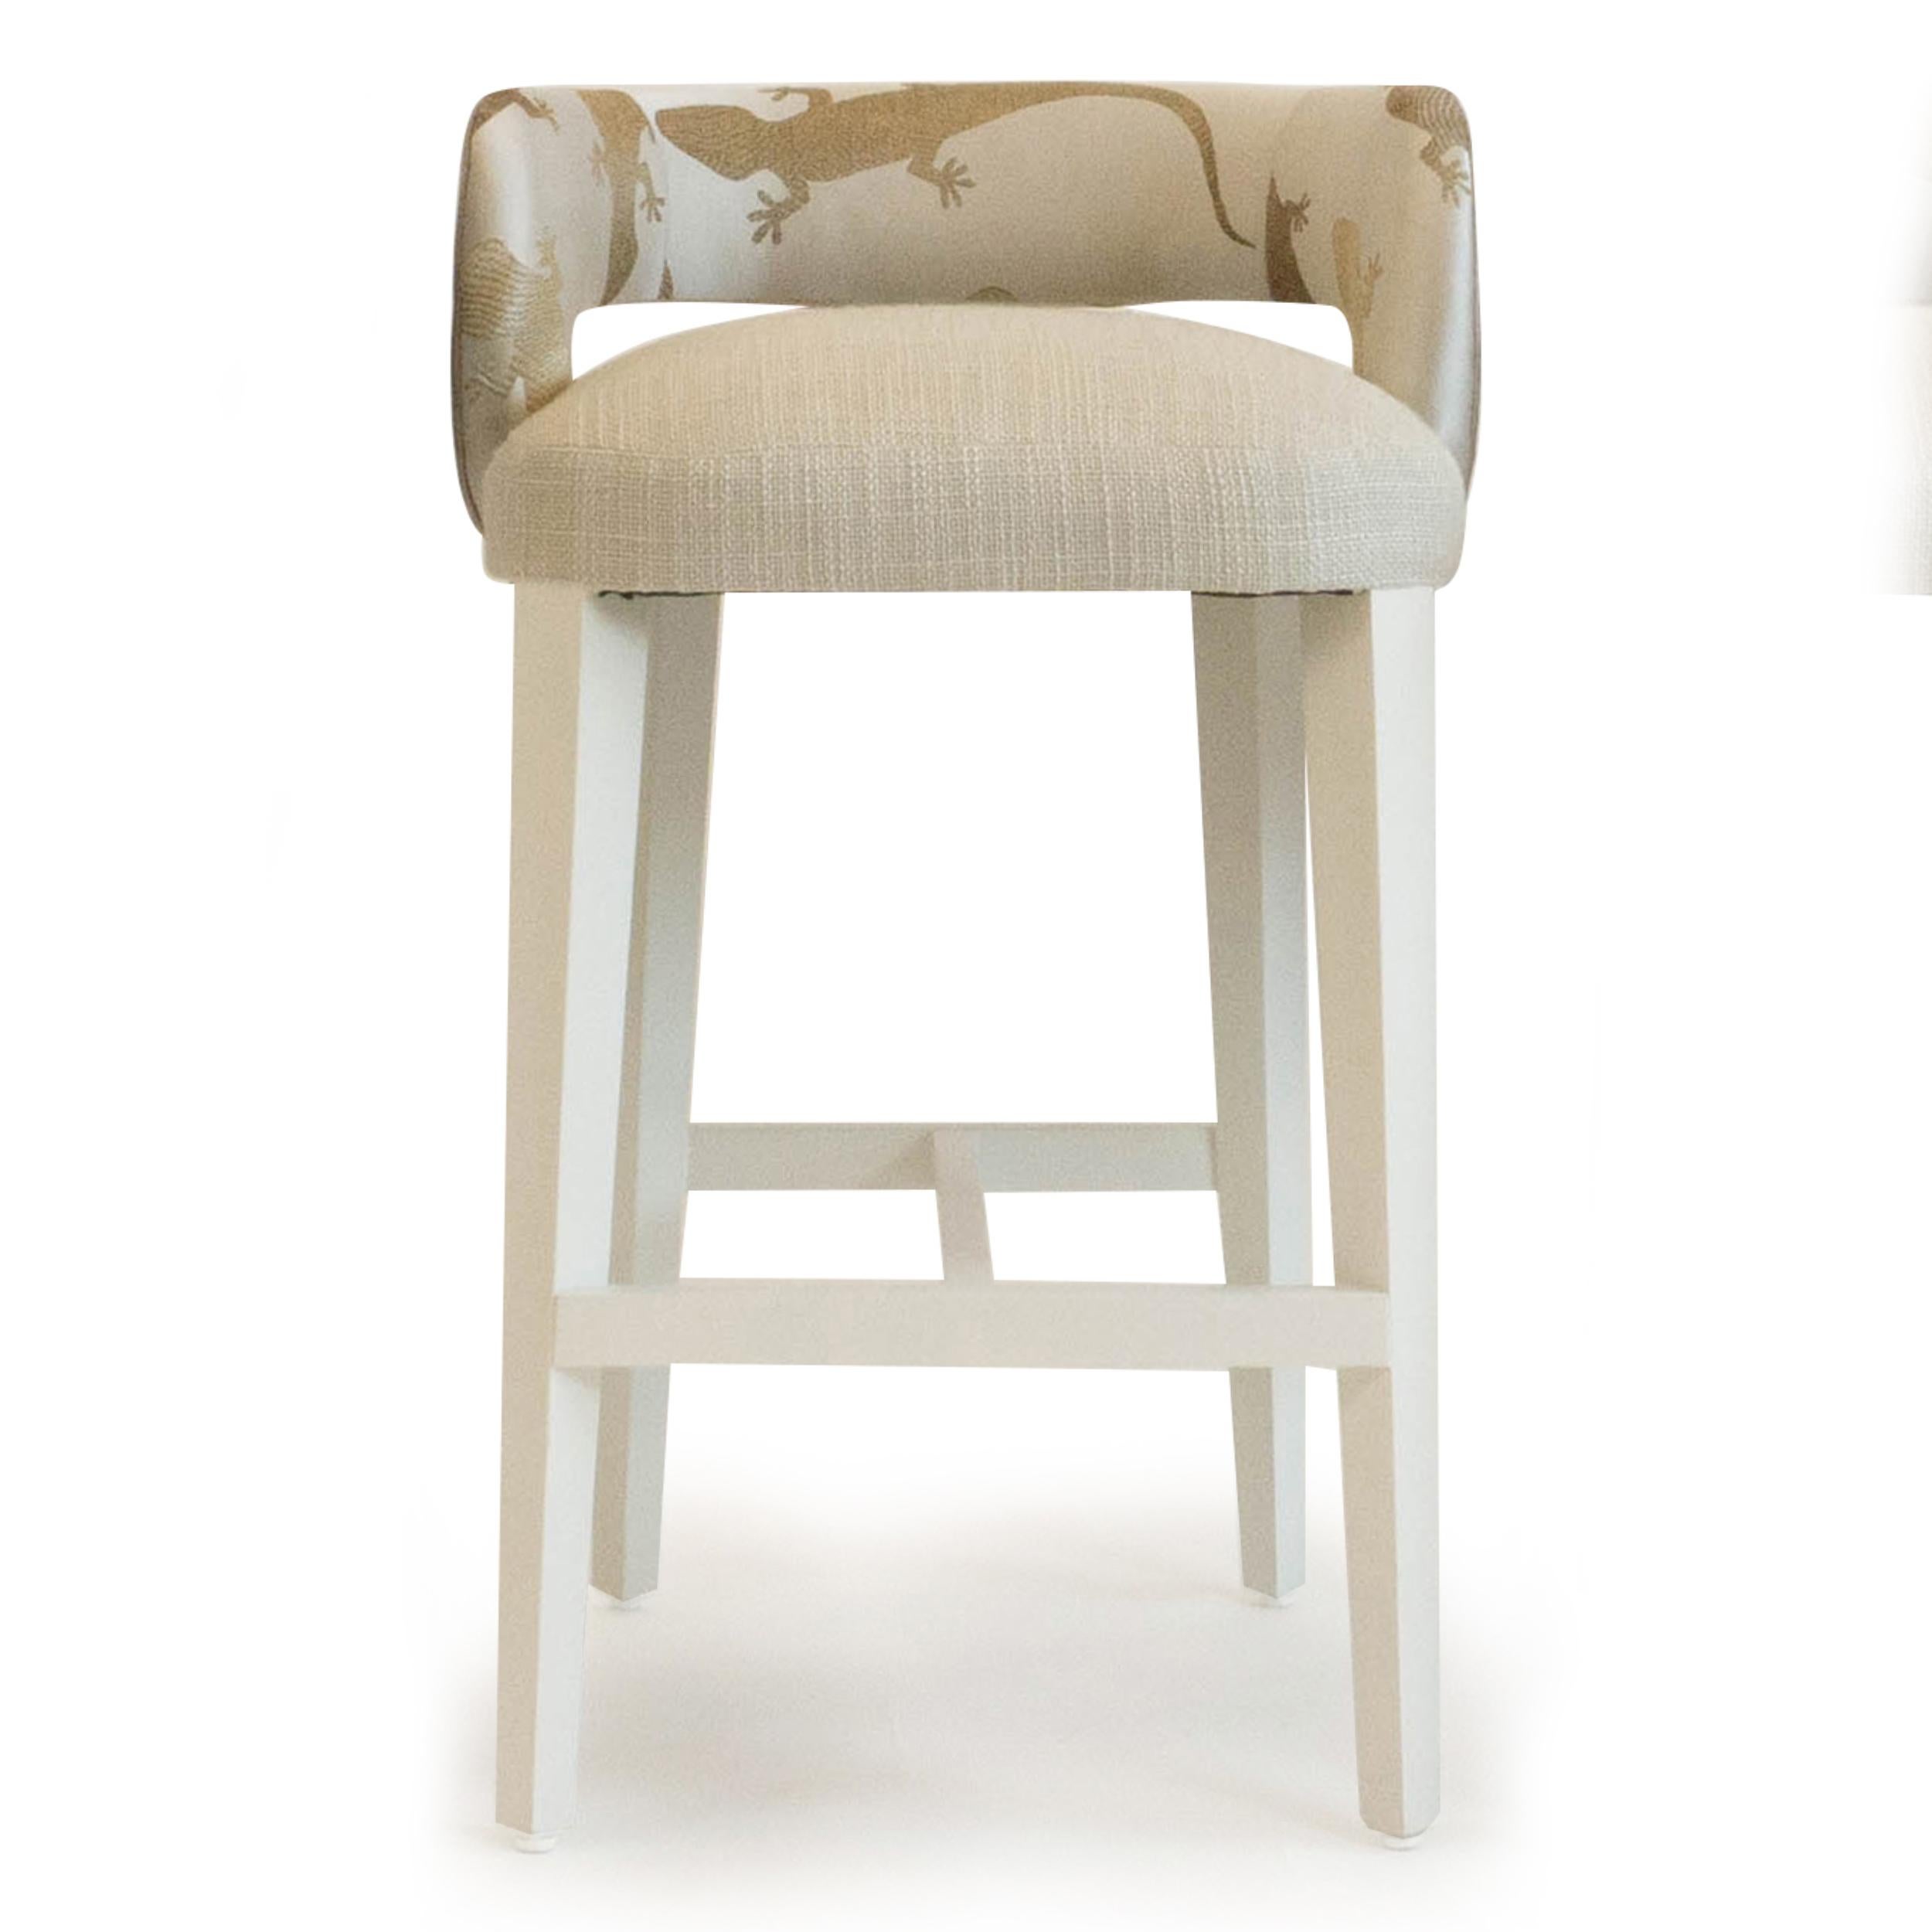 Low open back bench seat counter stool upholstered in a combination of a silk and poly blend Romo fabric with salamander print, linen on the seat and vinyl on the back. Legs painted in marine lacquer. Seat cushion is made with a deep firm foam. Can